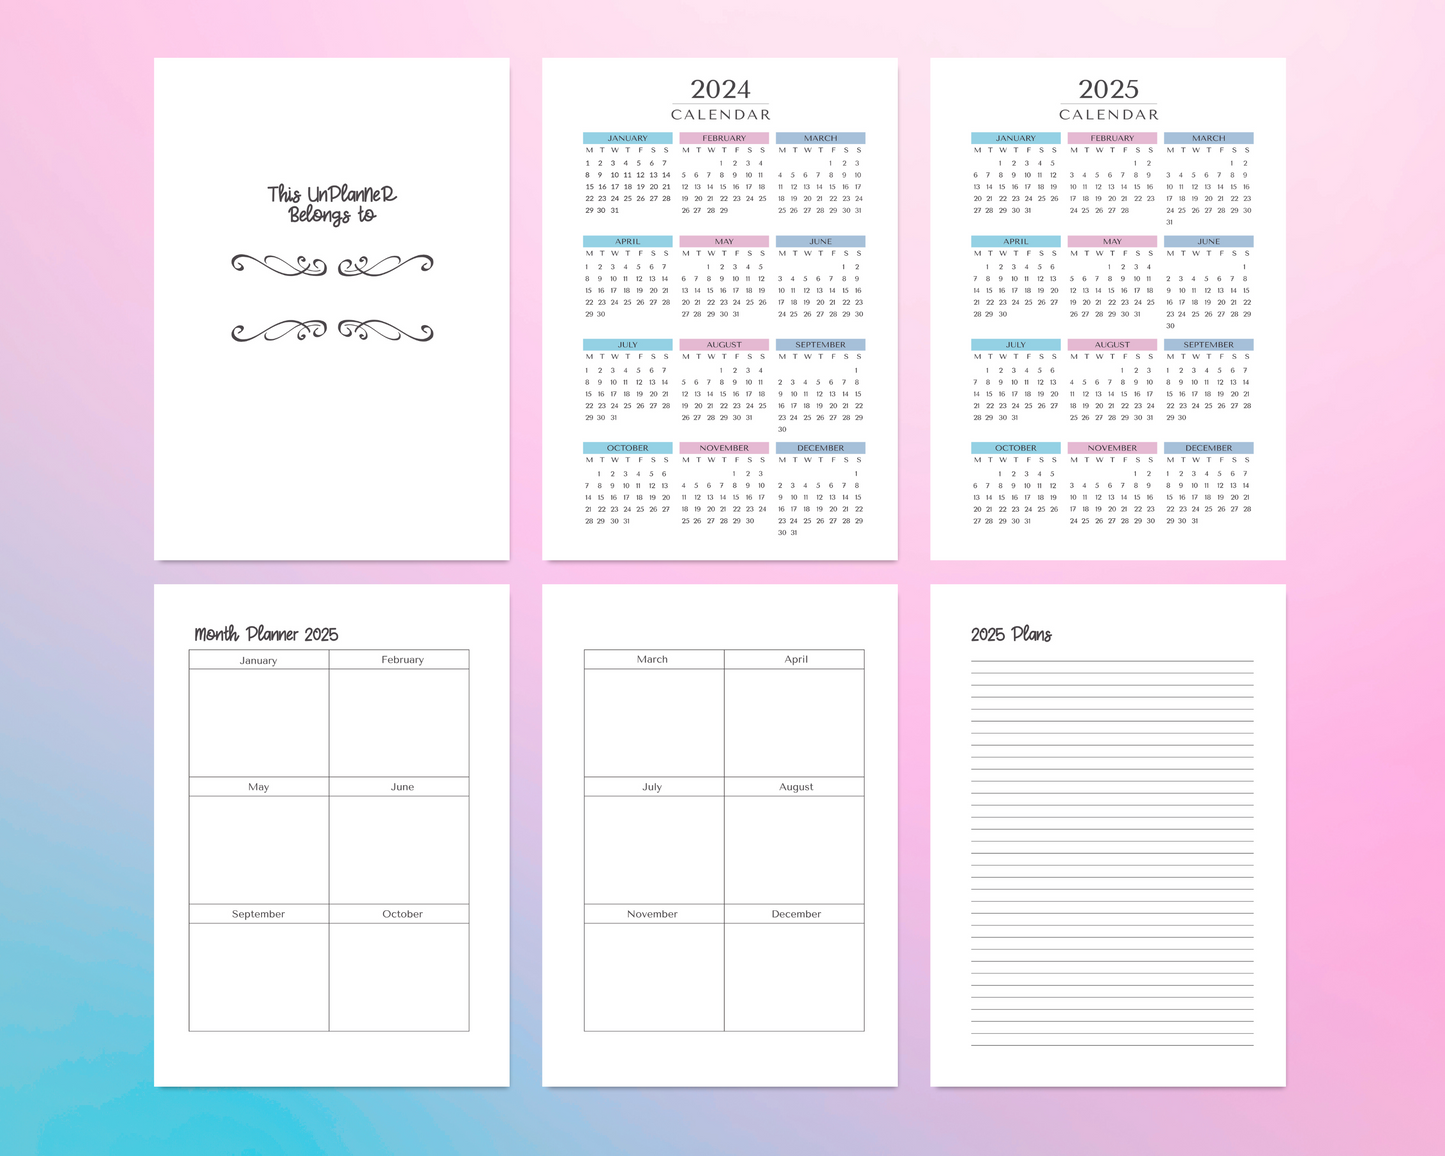 The UnPlanNeR 2024 - Fully Dated Colour A4 PDF Planner